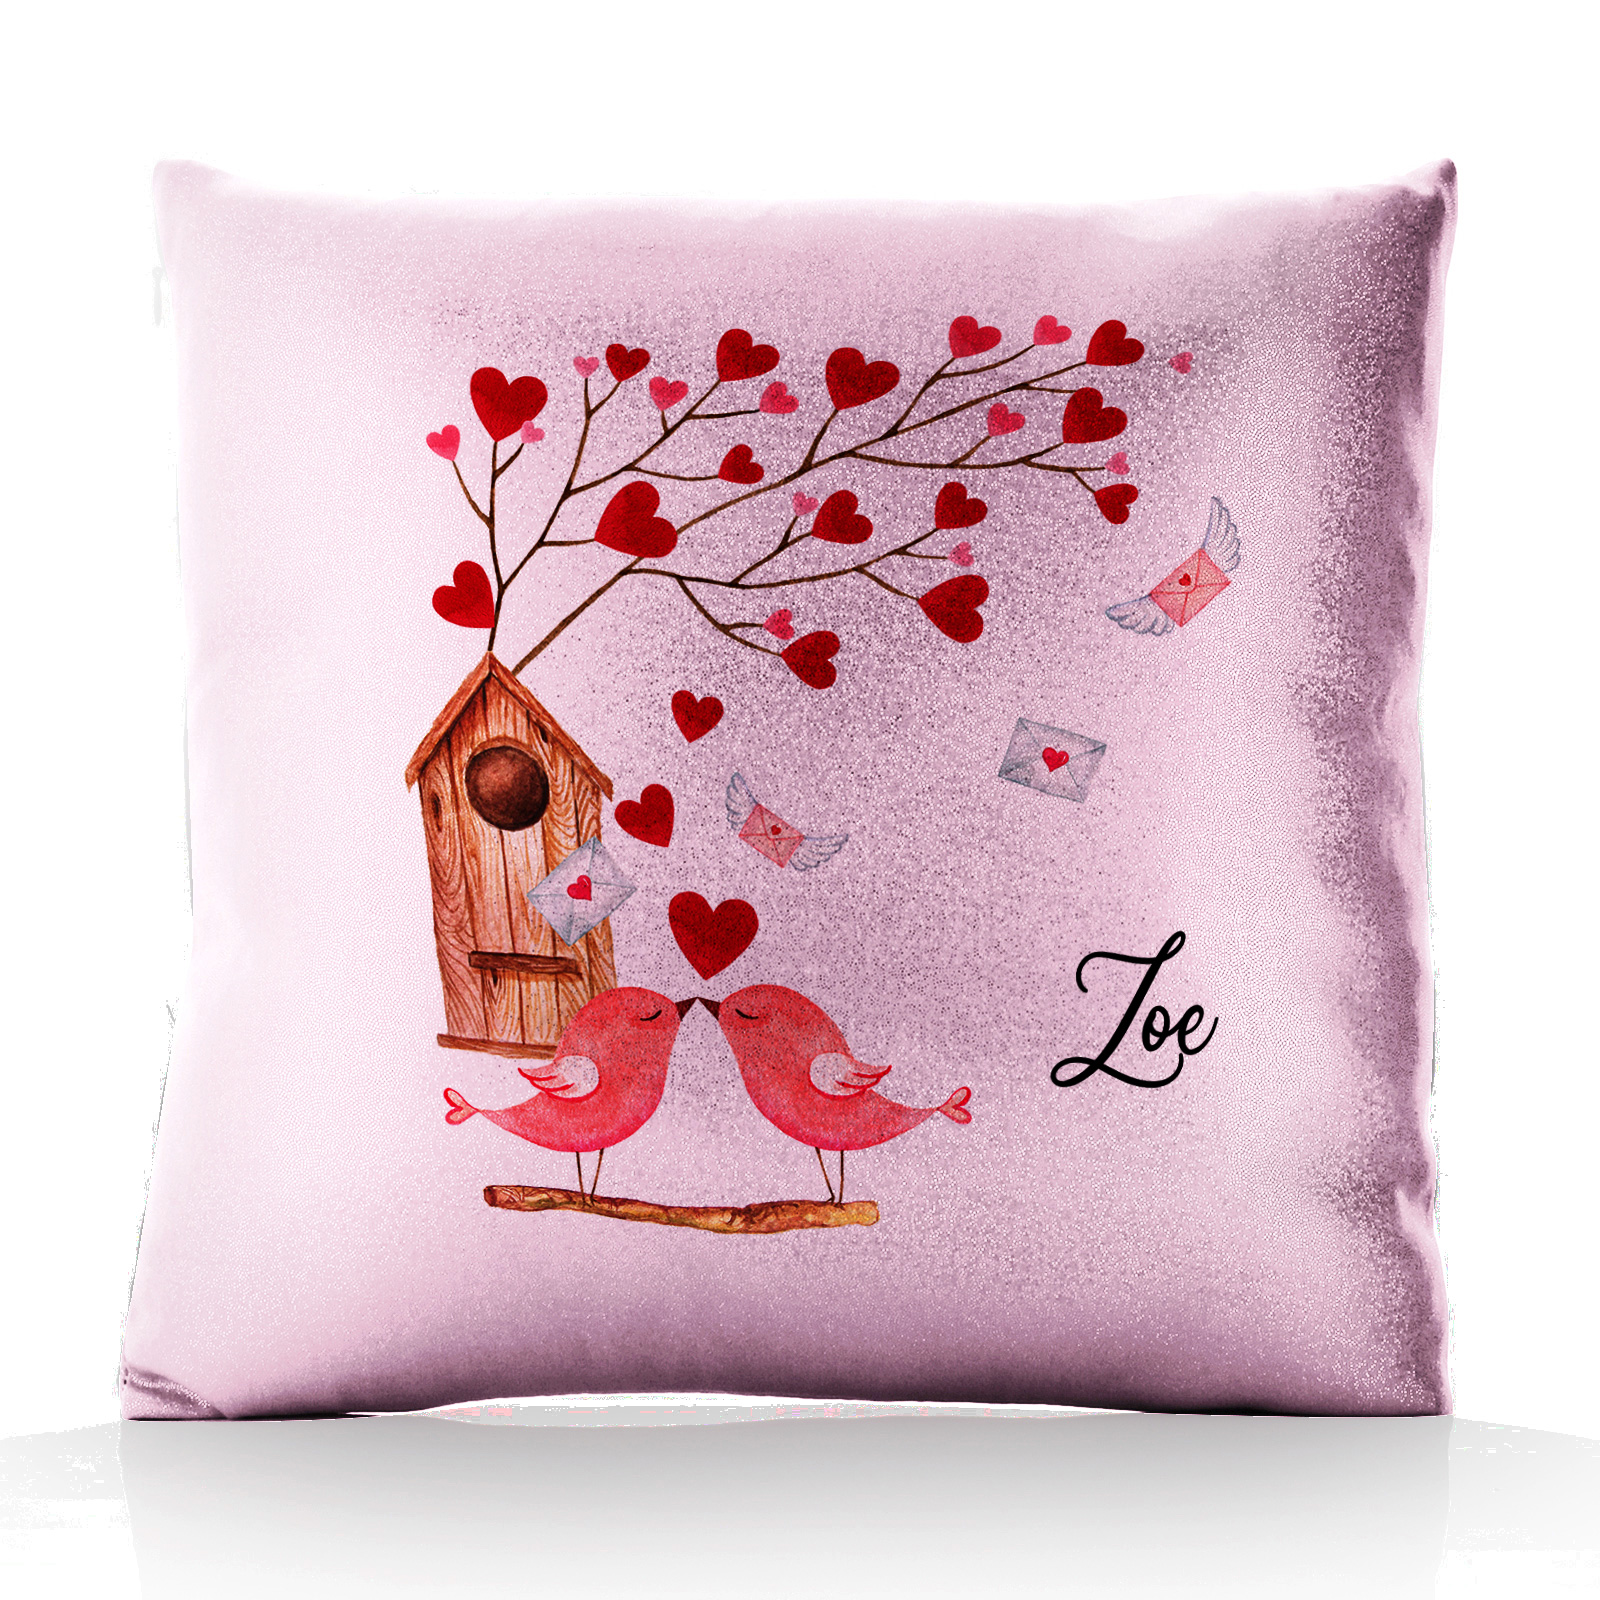 Love Square Personalized Pillow, Personalized Pillows